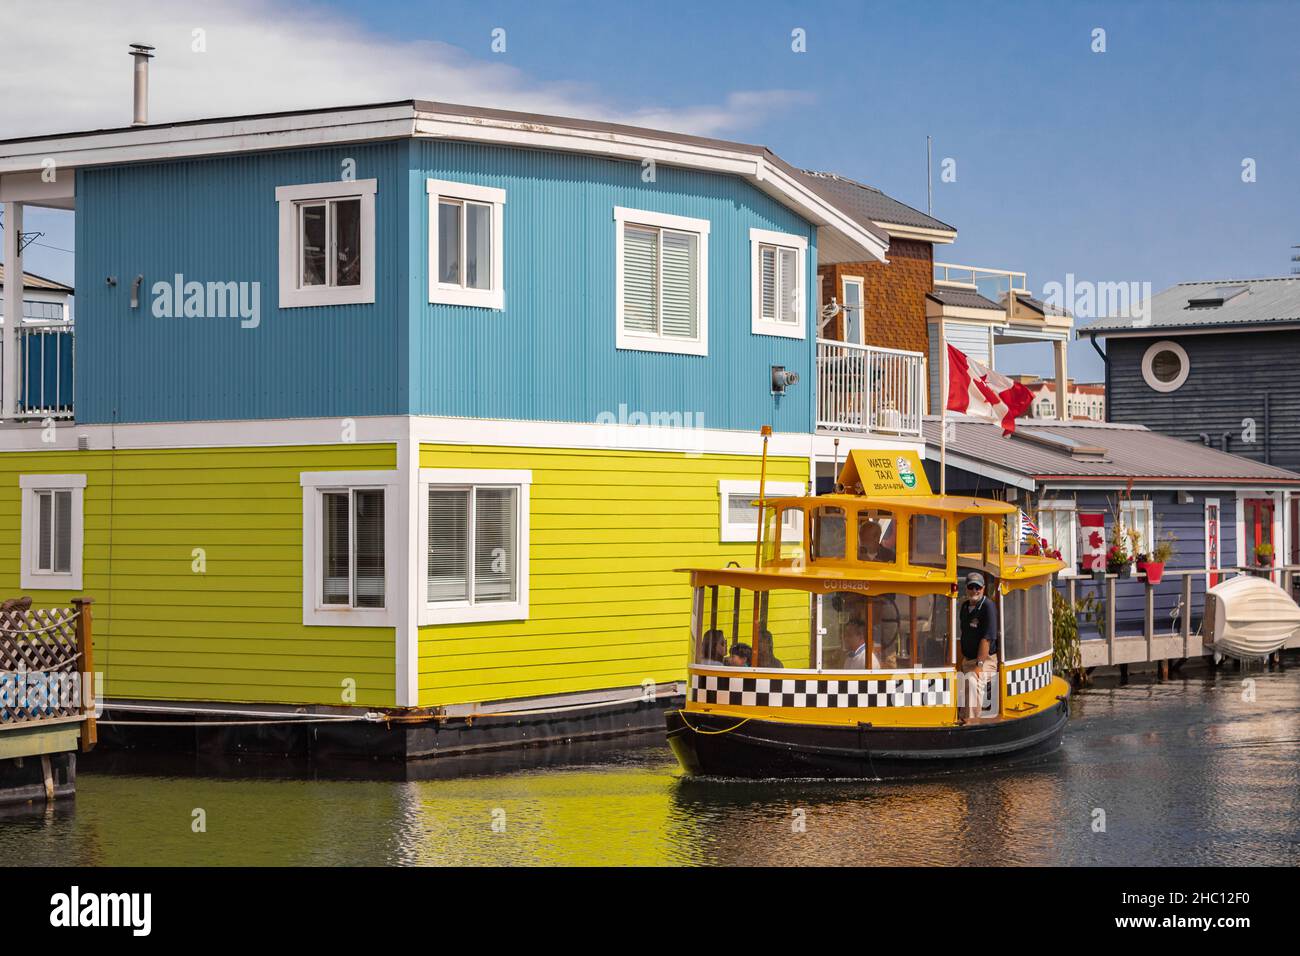 Floating Home Village Colorful Houseboats and water taxi. Fisherman's Wharf Reflection Inner Harbor, Victoria BC, Canada Pacific Northwest. Area has f Stock Photo